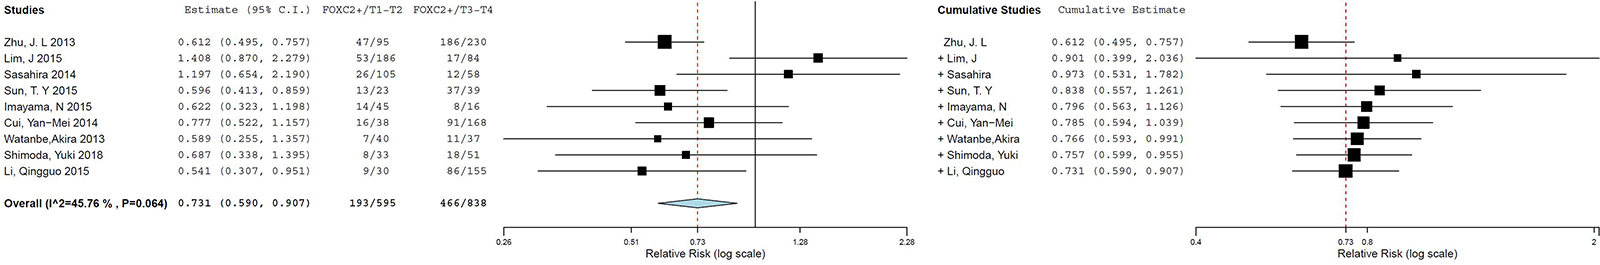 Relative risk of FOXC2 expression in early- and late-stage tumors (individual studies).